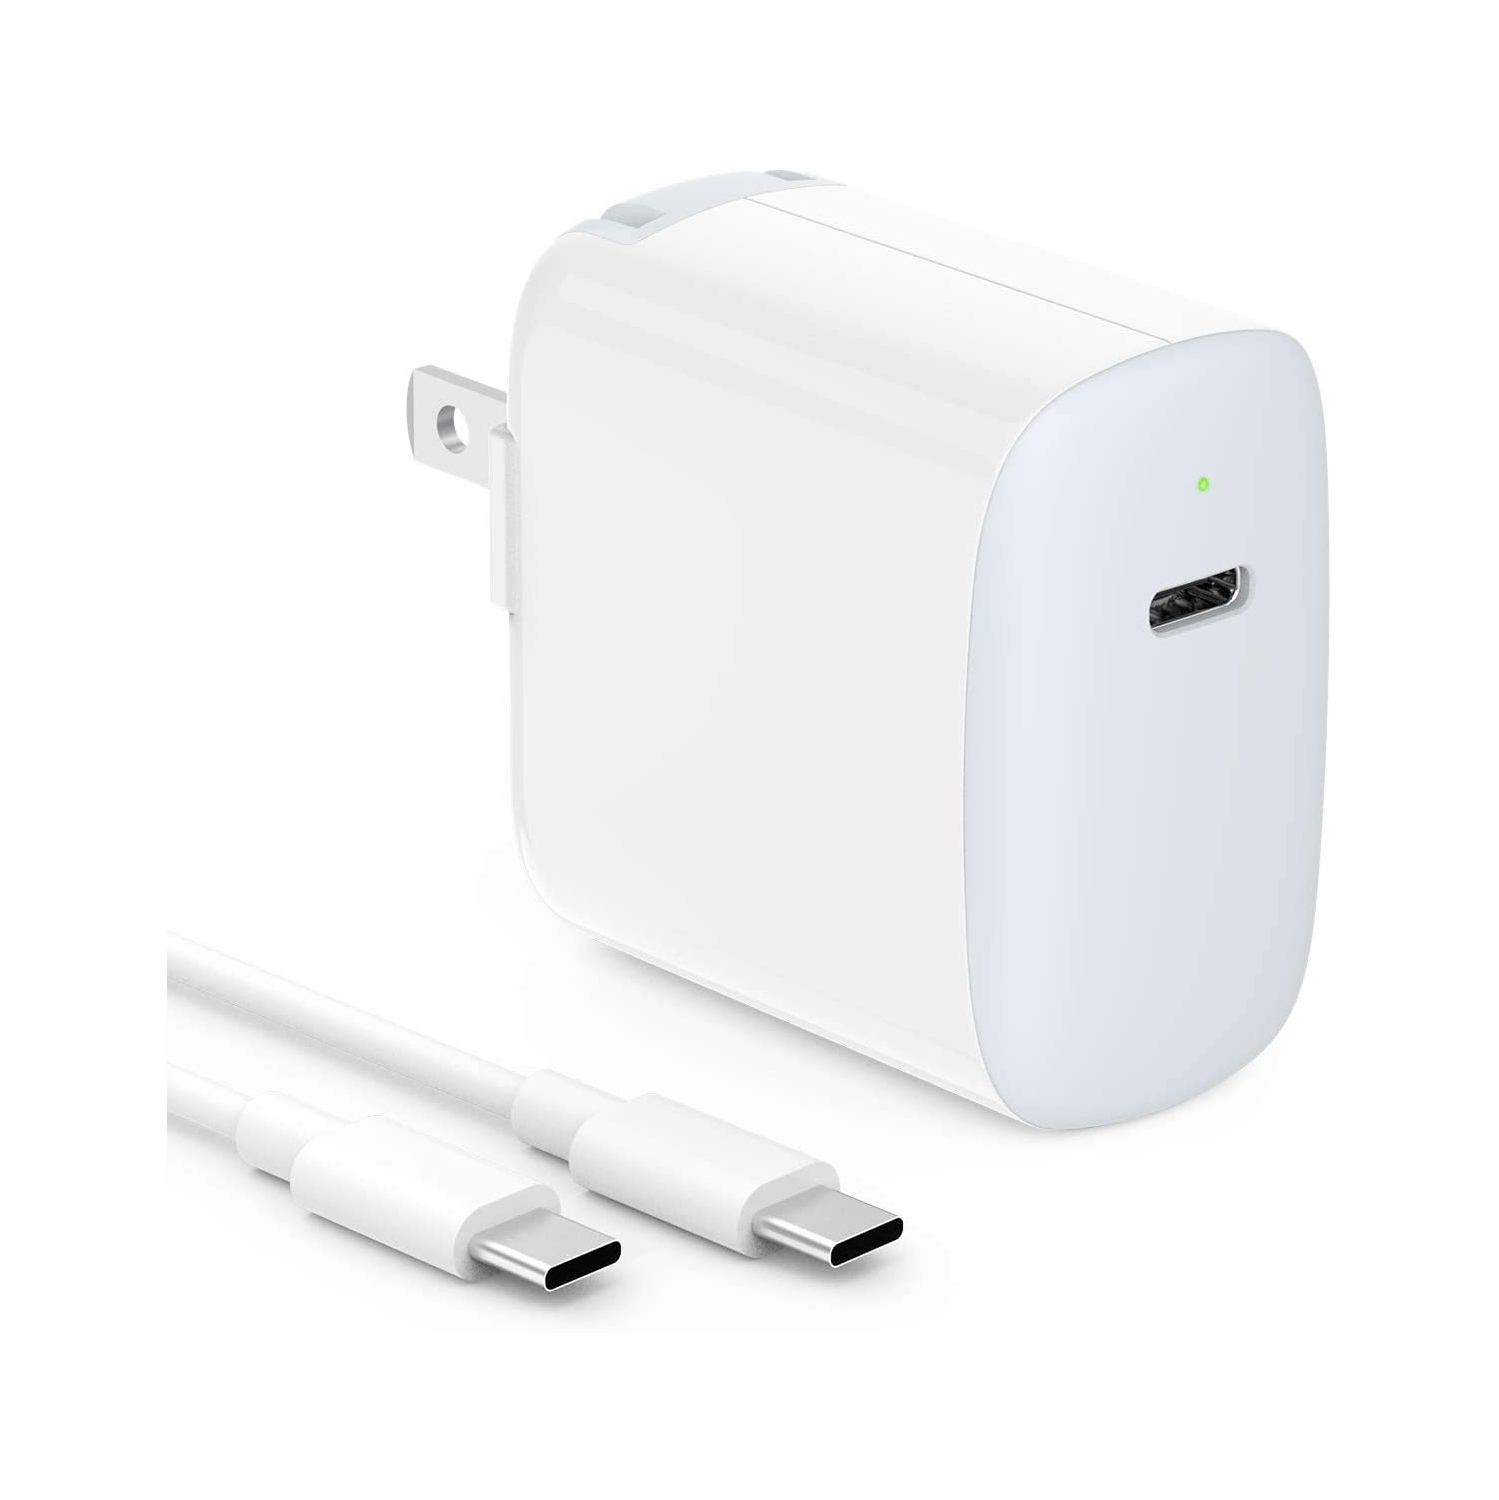 For Apple Ipads, macbooks - 20W USB C Fast Charger + 6.6ft USB C to C Charging Cord (Combo) - Compatible with Ipad Air & Pro models| Air 4, Ipad 12.9 & 11 inch models